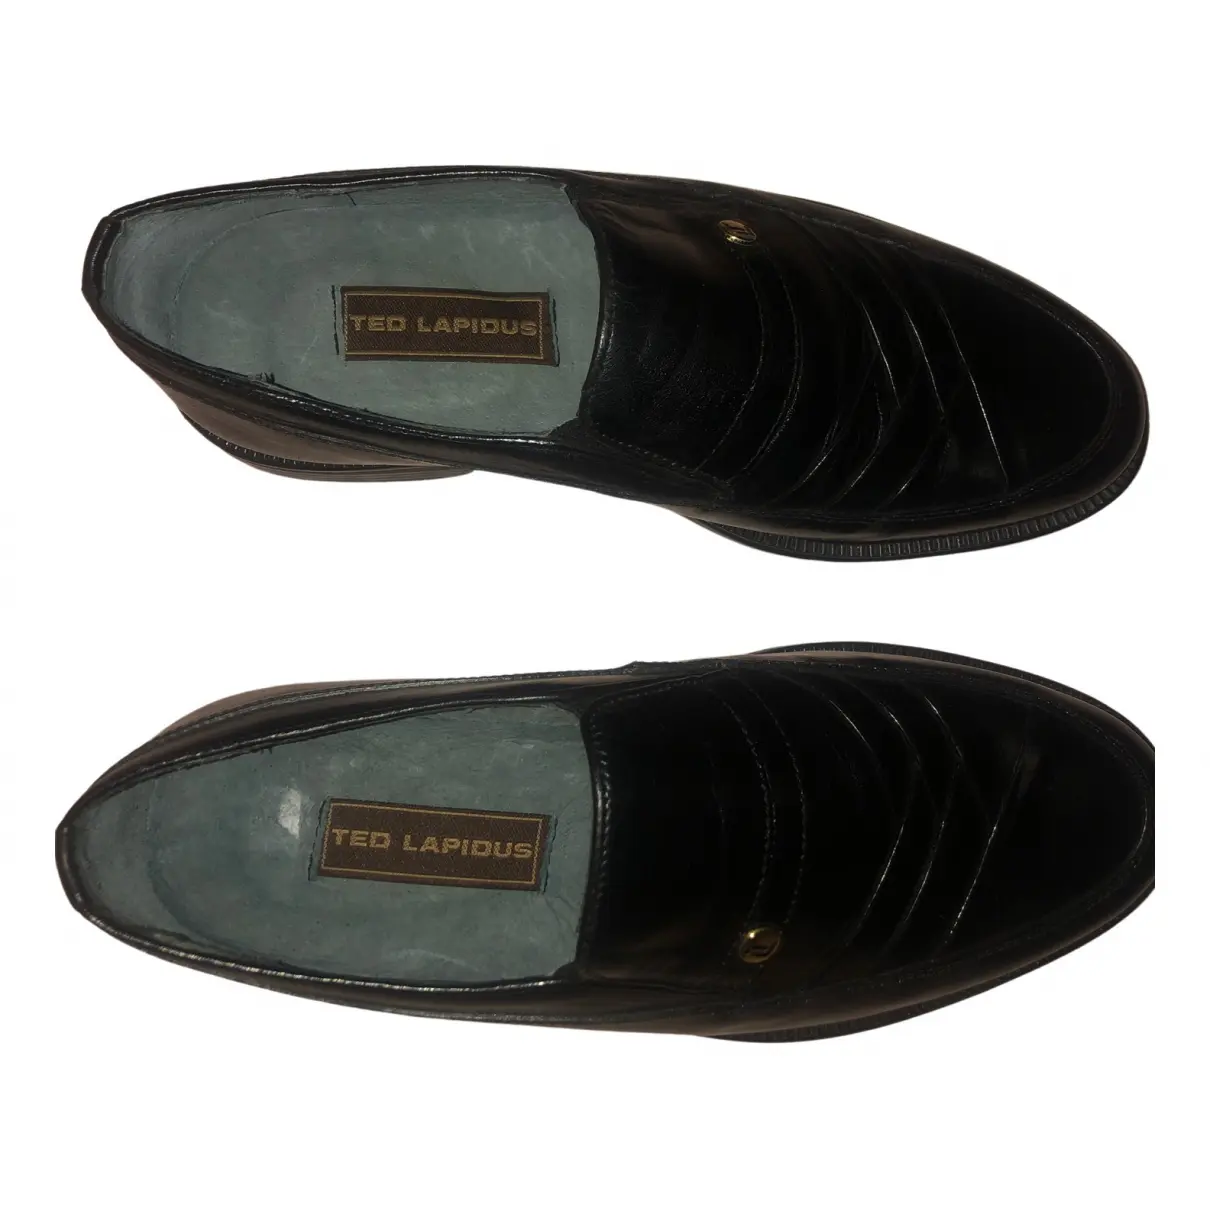 Leather flats Ted Lapidus